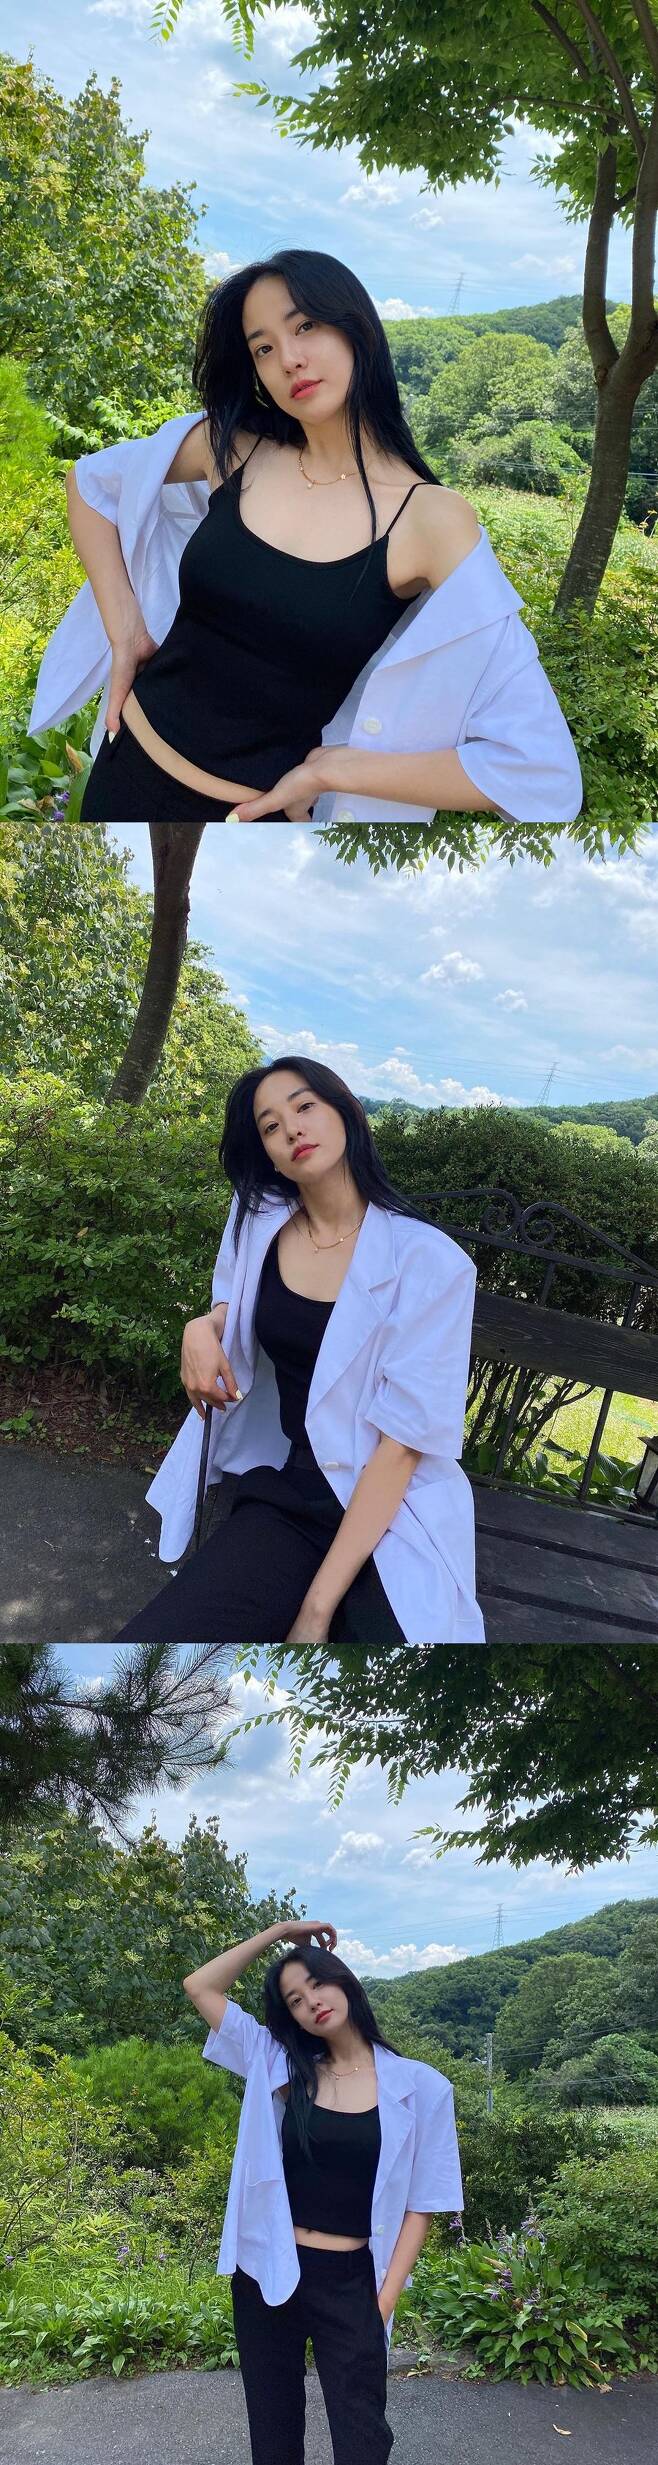 Actor Lee Joo-yeon from Group After School boasted an extraordinary visual.Lee Joo-yeon released a photo on his Instagram page on Monday of him standing in the background of vegetation.In the photo, Lee Joo-yeon paired a white short-sleeved jacket with black sleeveless, pants and white blowers, which exudes admiration with Supernatural yet stylish VIP jewels.Especially, he boasted a visual of a person through SNS a while ago, and he is also attracting attention with transparent and clear visuals.Meanwhile, Lee Joo-yeon recently gathered a topic by reuniting after school through SBS civilization express.